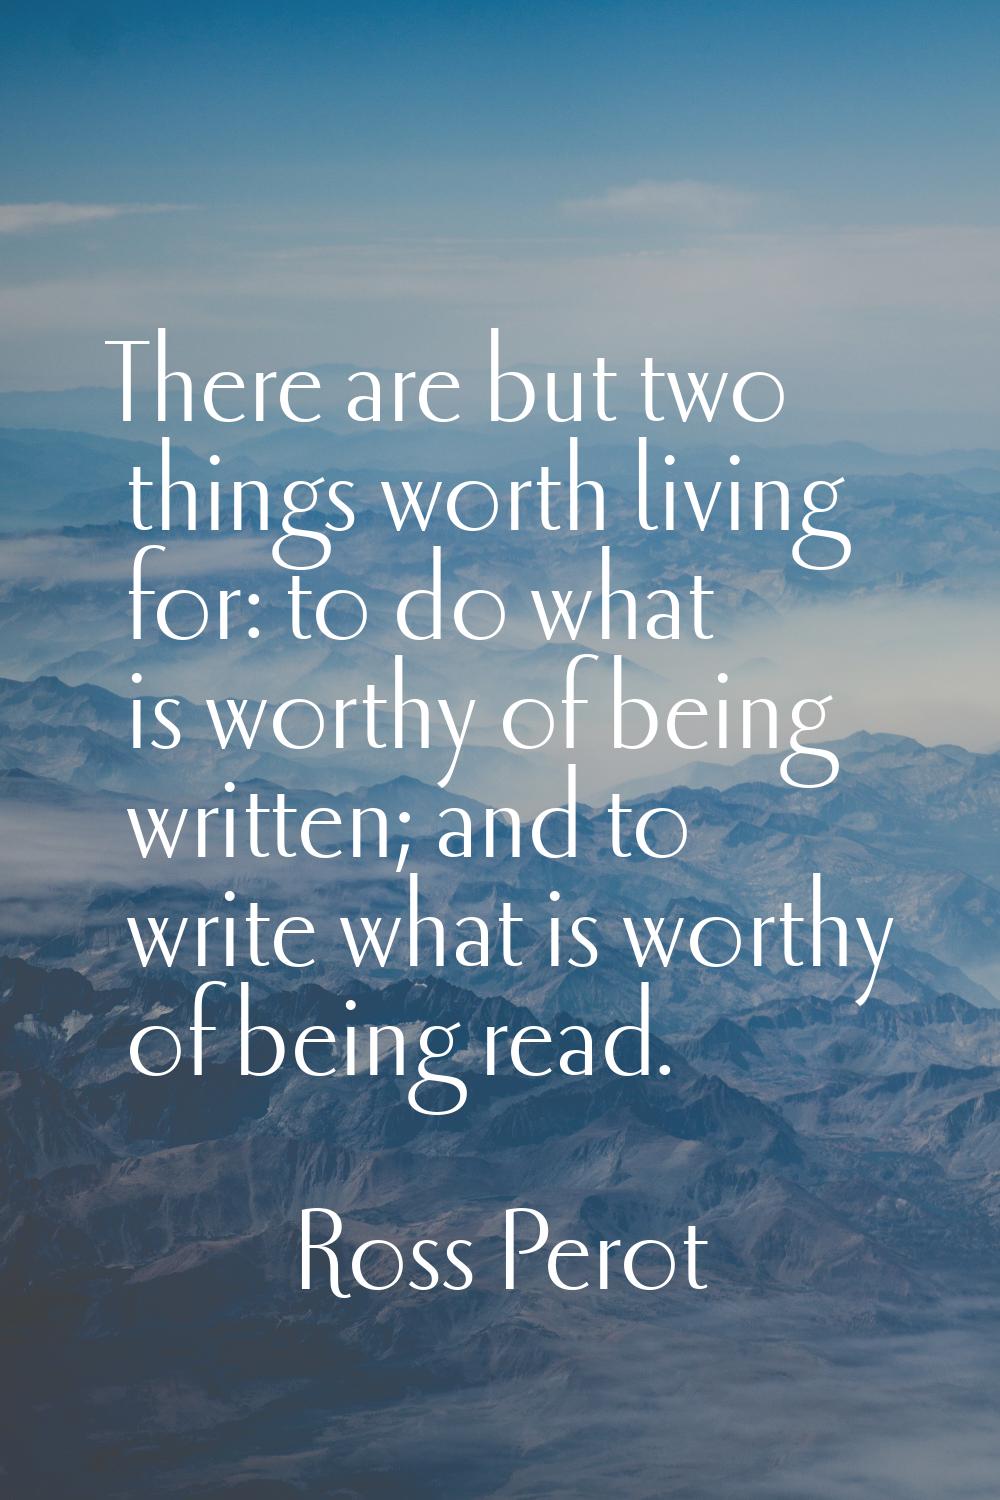 There are but two things worth living for: to do what is worthy of being written; and to write what